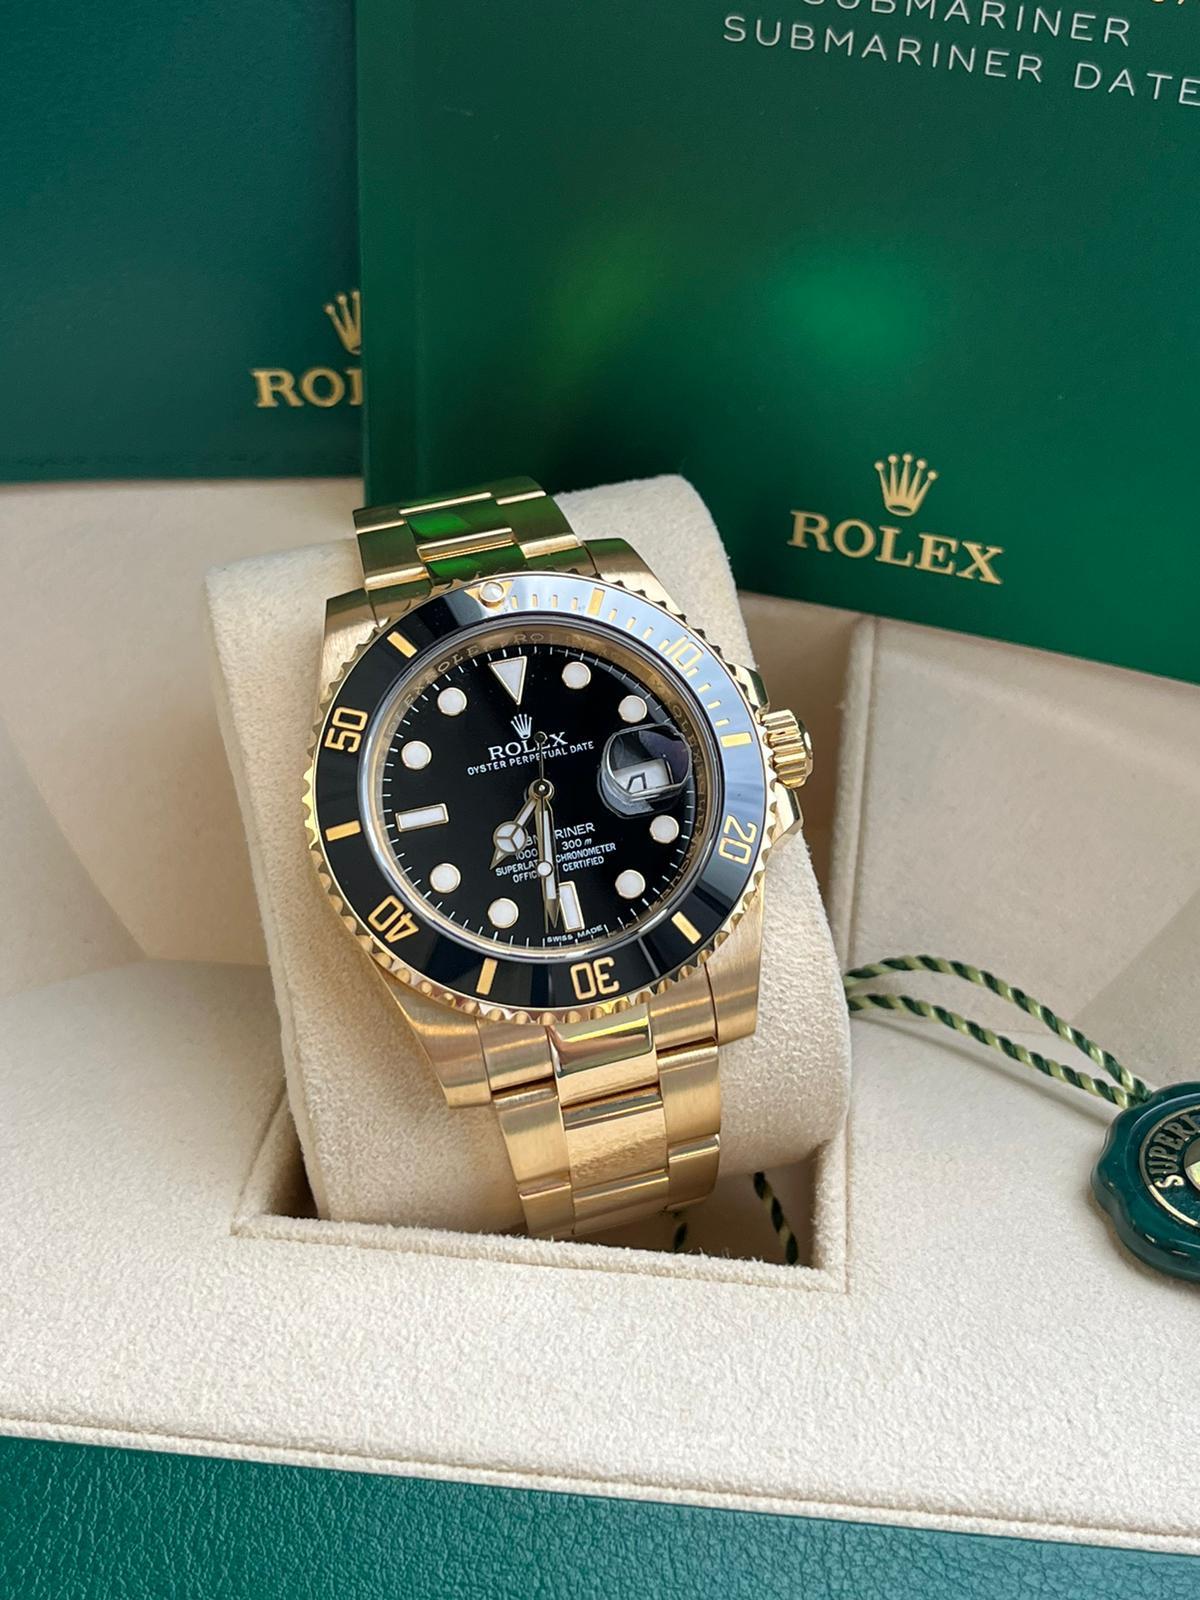 Rolex Submariner Date Automatic Yellow Gold Black Dial Men's Watch 116618LN For Sale 1